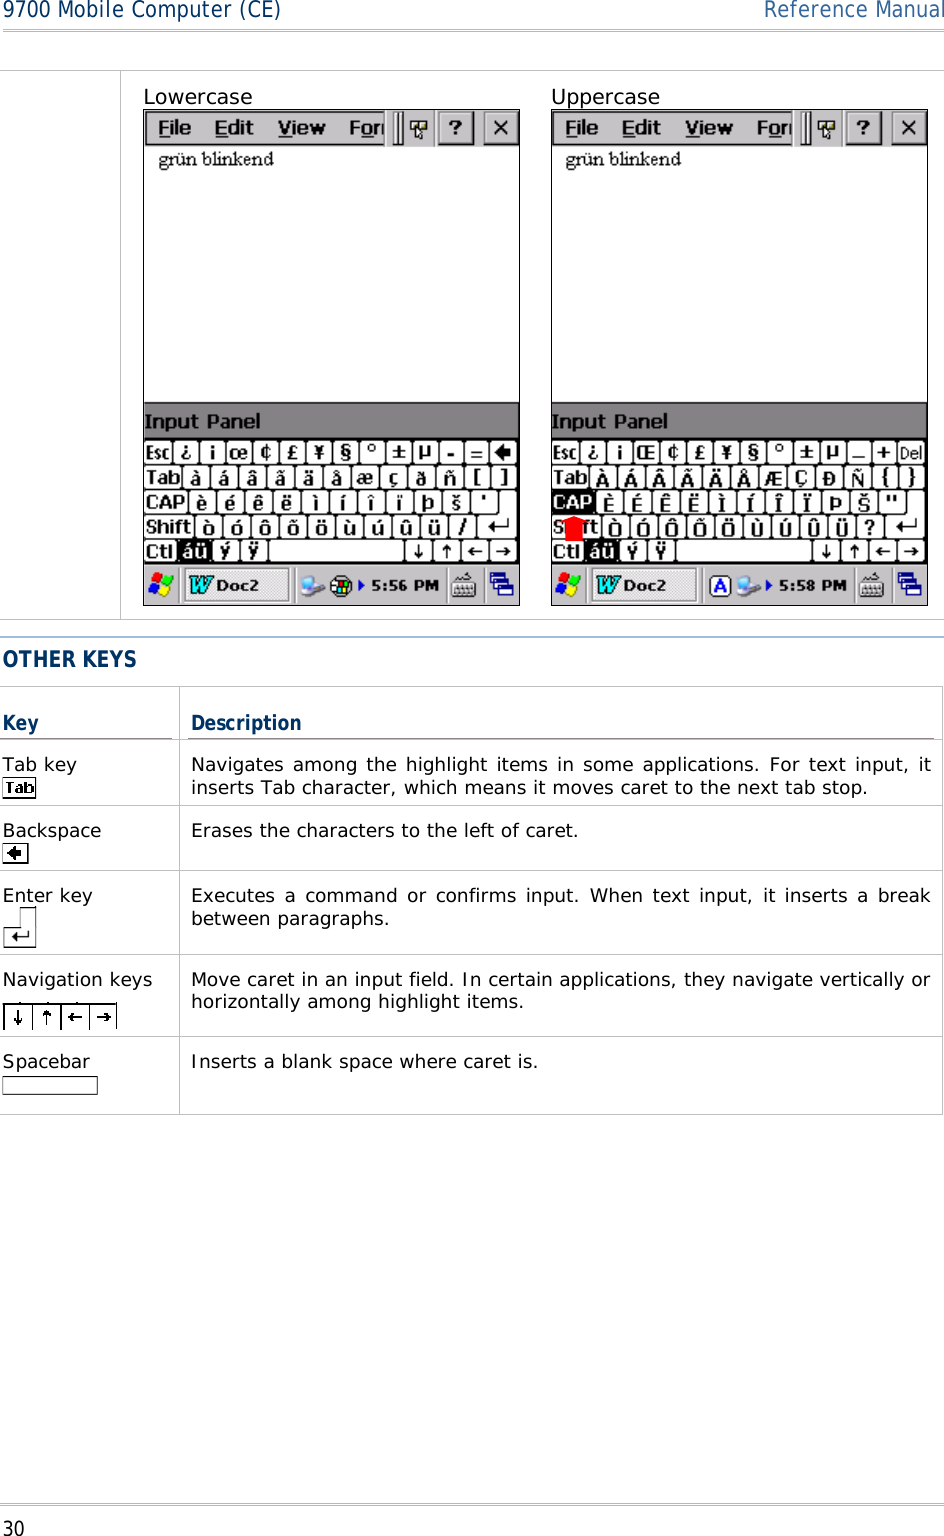 309700 Mobile Computer (CE)  Reference ManualLowercase UppercaseOTHER KEYS Key DescriptionTab key  Navigates among the highlight items in some applications. For text input, it inserts Tab character, which means it moves caret to the next tab stop. Backspace Erases the characters to the left of caret. Enter key  Executes a command or confirms input. When text input, it inserts a break between paragraphs. Navigation keys  Move caret in an input field. In certain applications, they navigate vertically or horizontally among highlight items. Spacebar Inserts a blank space where caret is. 